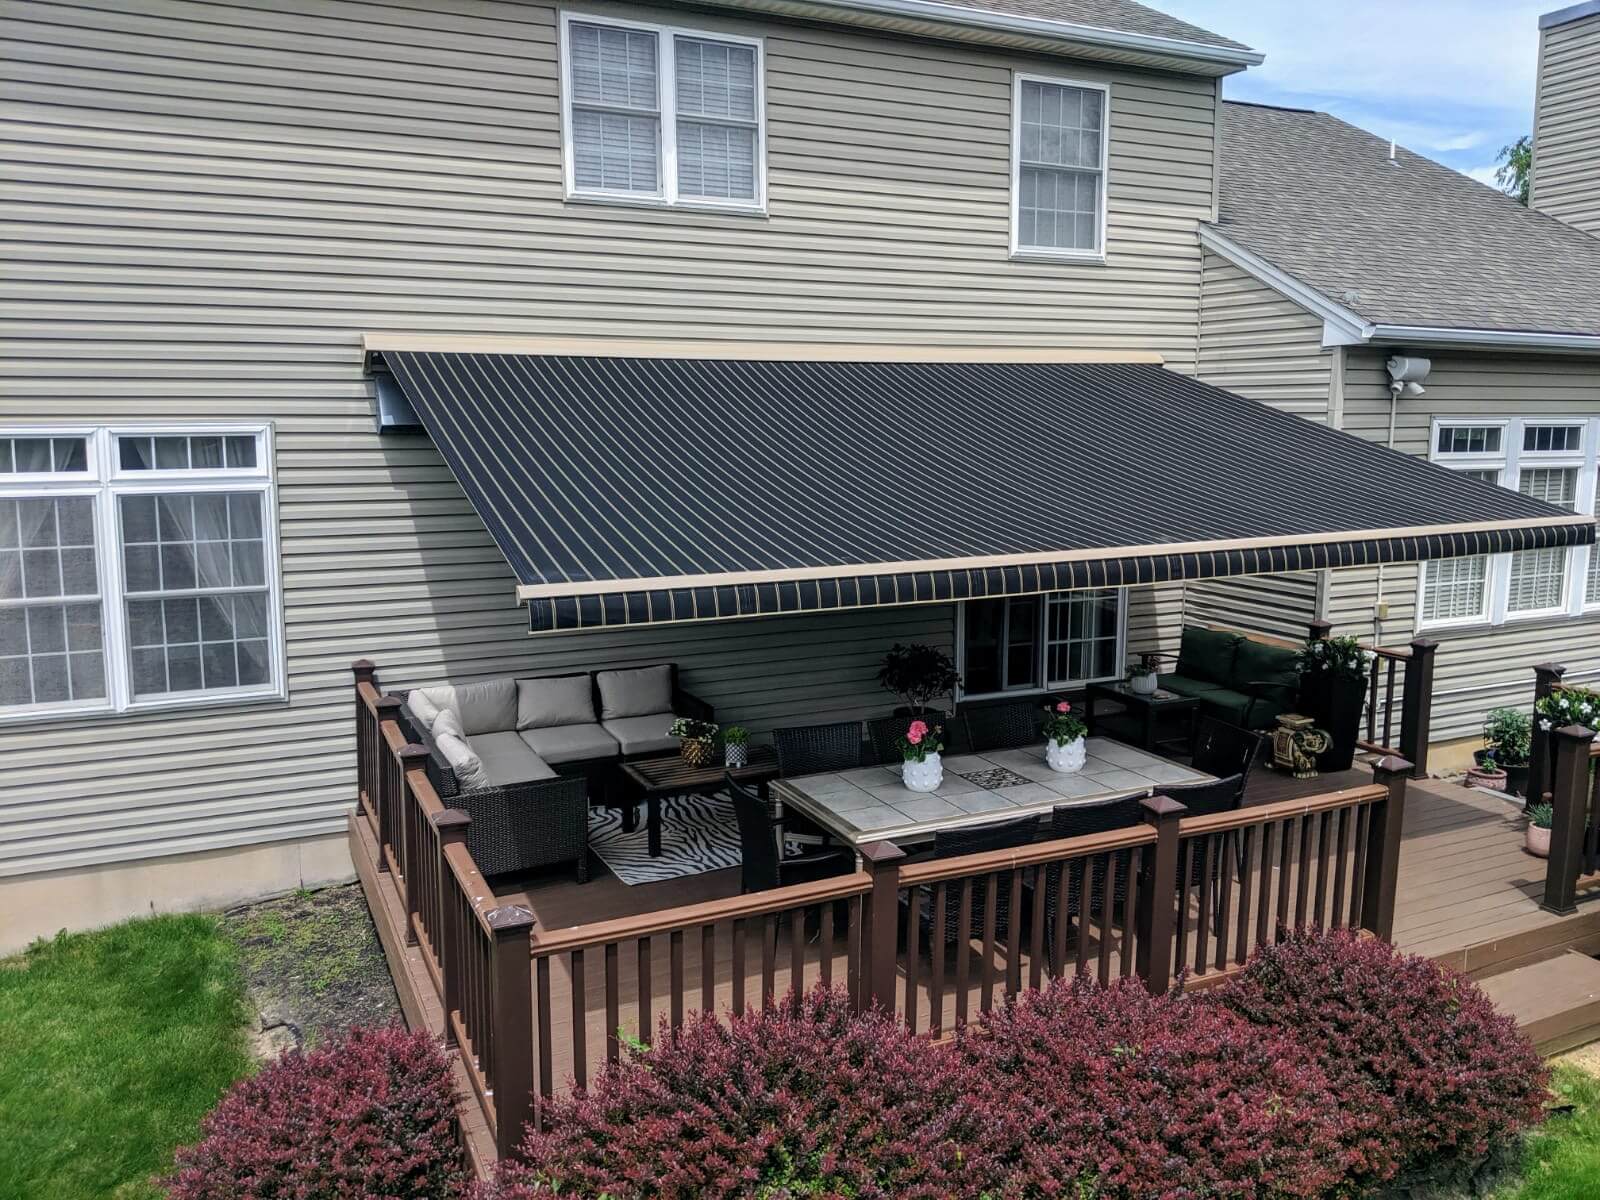 Furnished deck with large black awning